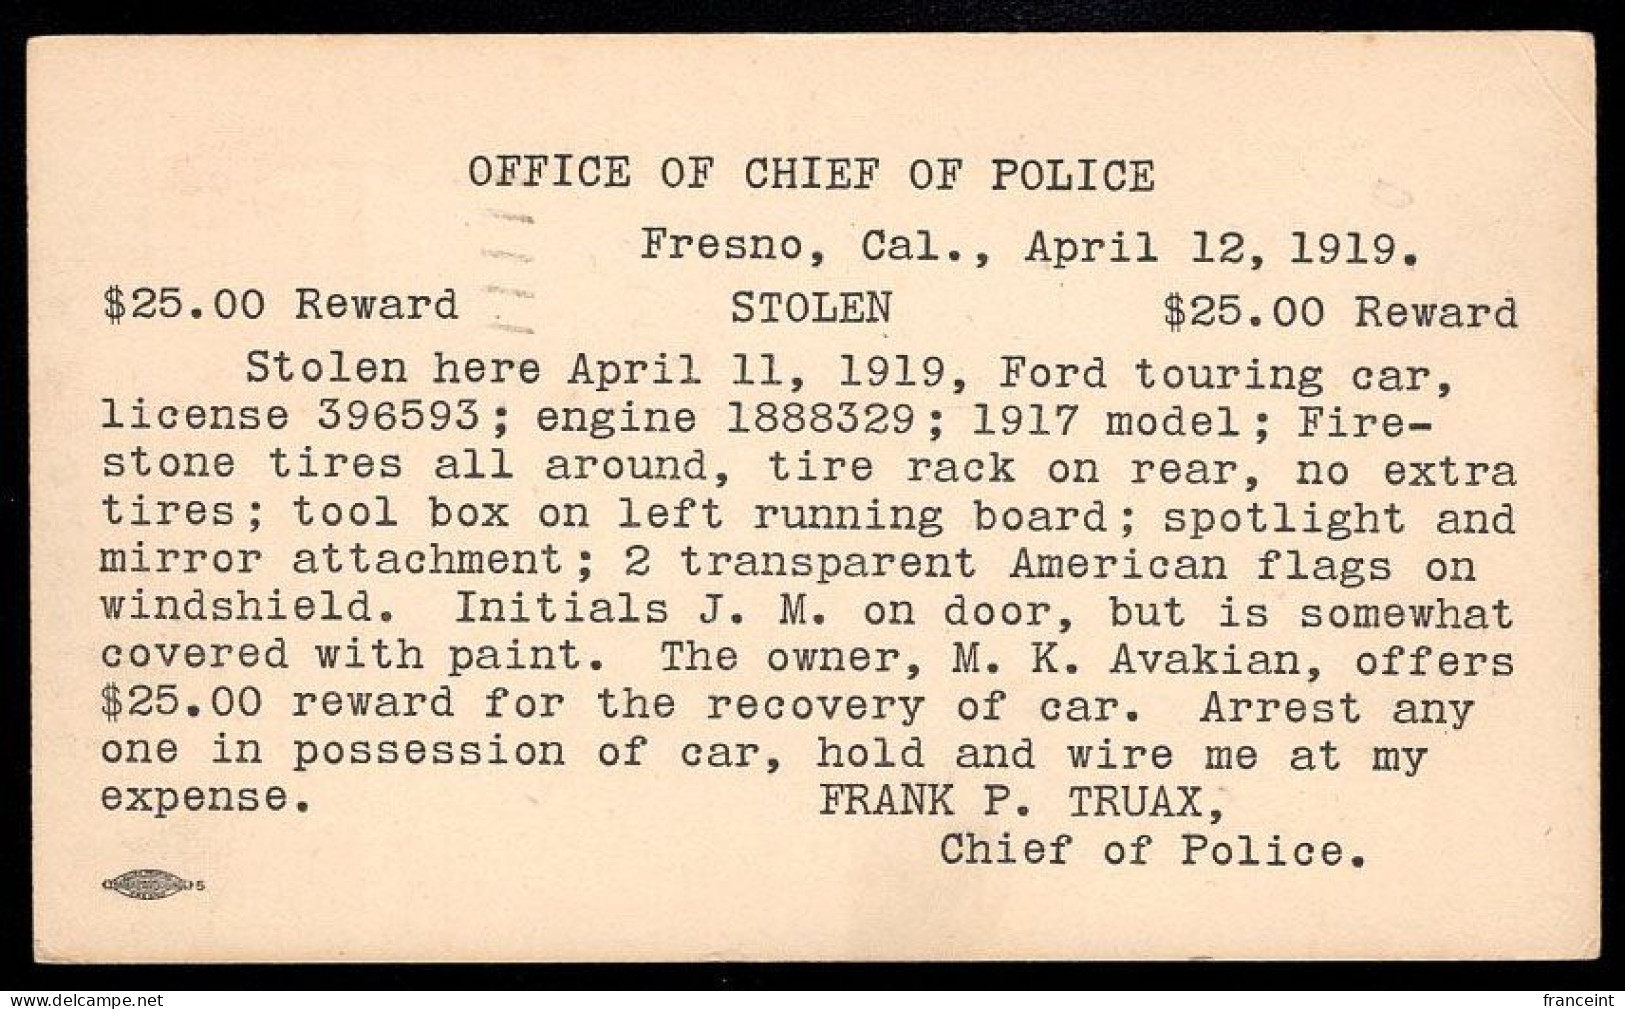 U.S.A.(1919) Auto Theft Reward Card. 2c Postal Card From Chief Of Police, Offering $25 Reward For Recovery Of 1917 Ford - Souvenirkarten